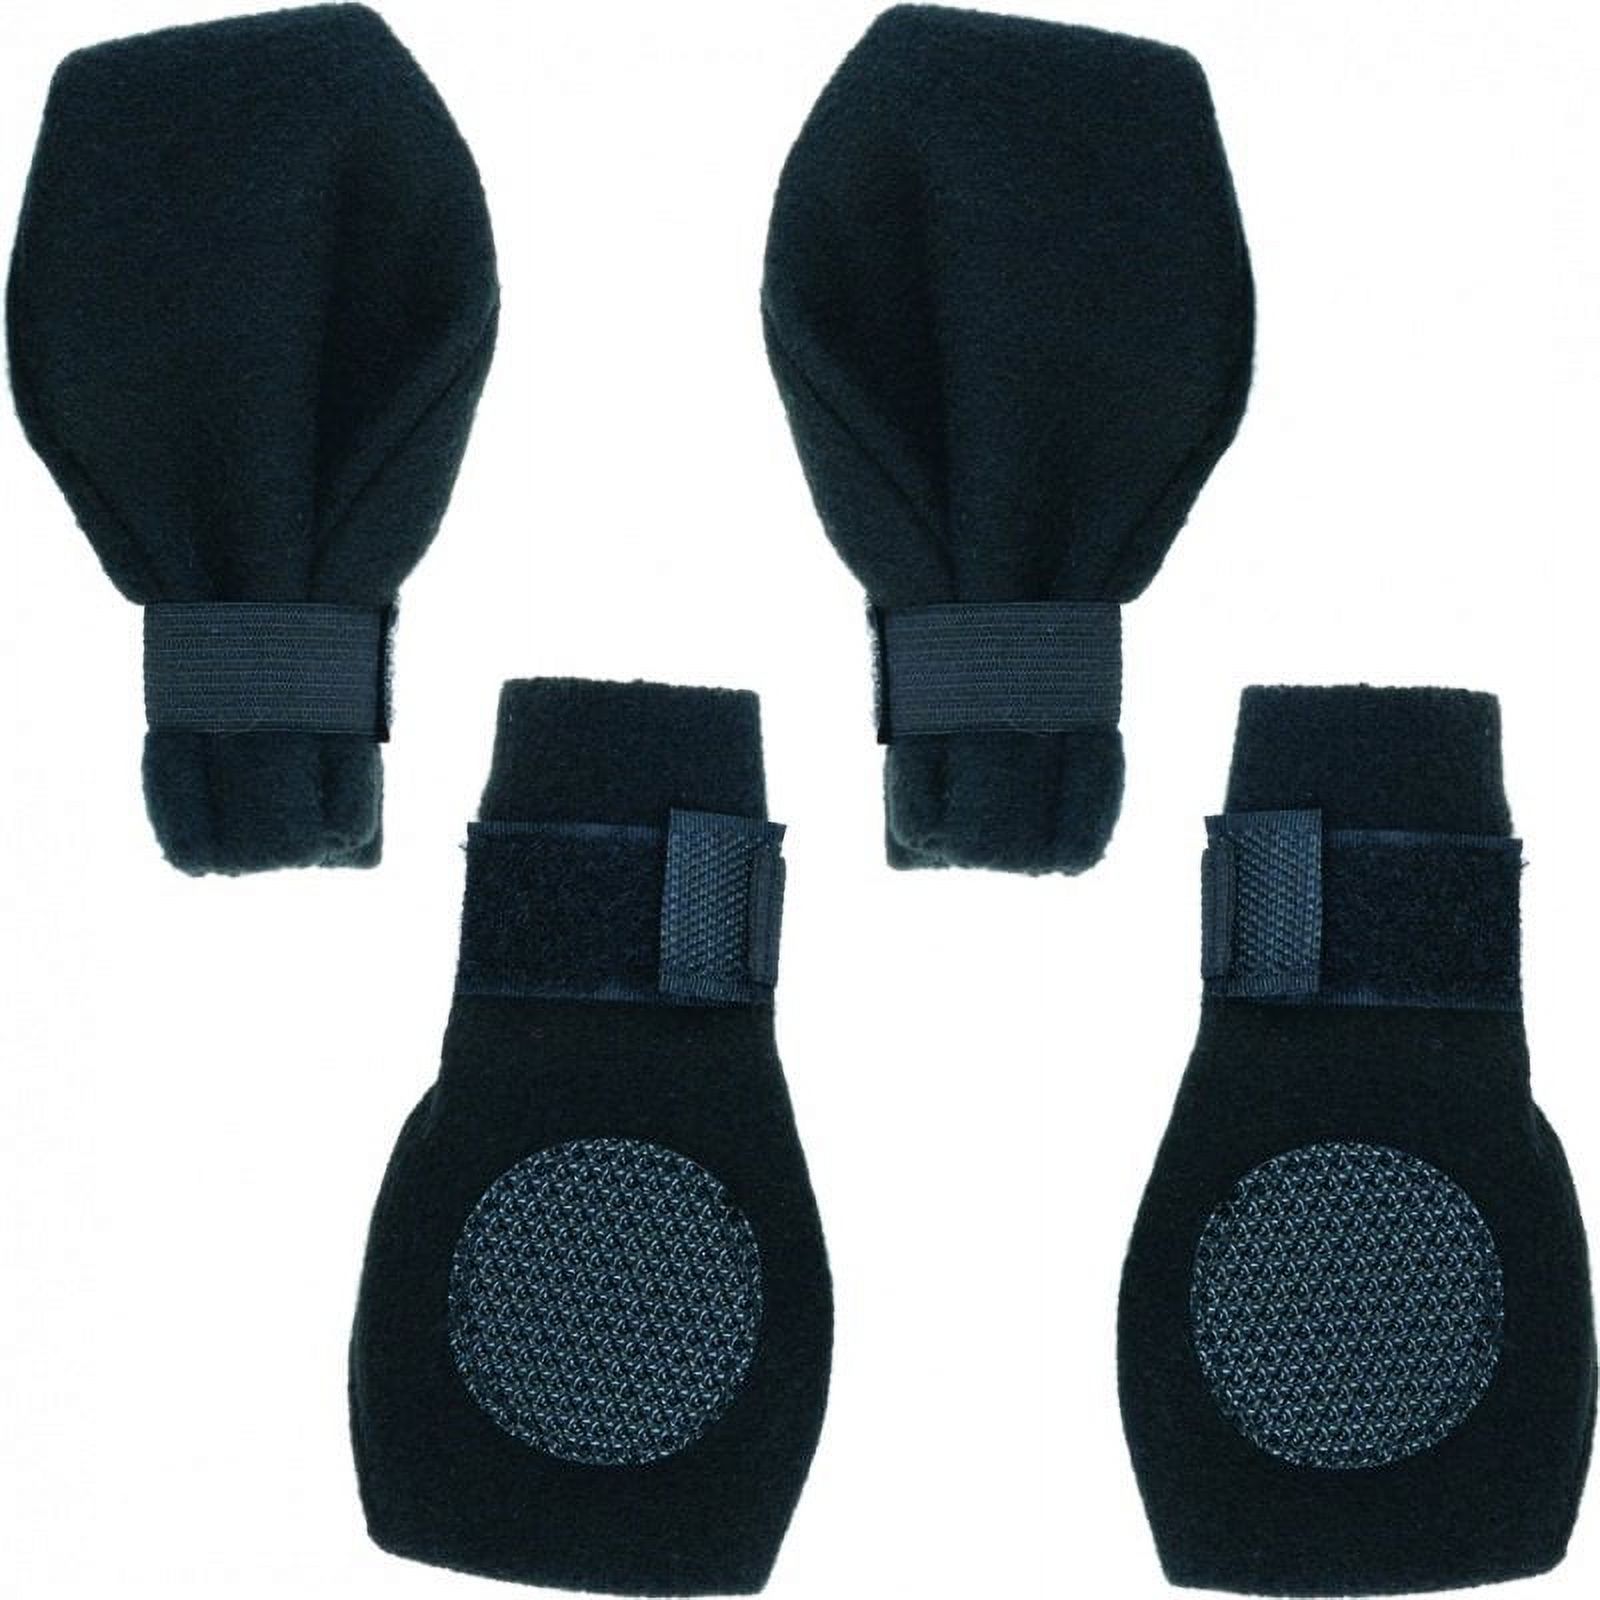 Ethical Pet Arctic Boots for Dogs - Black - image 1 of 3